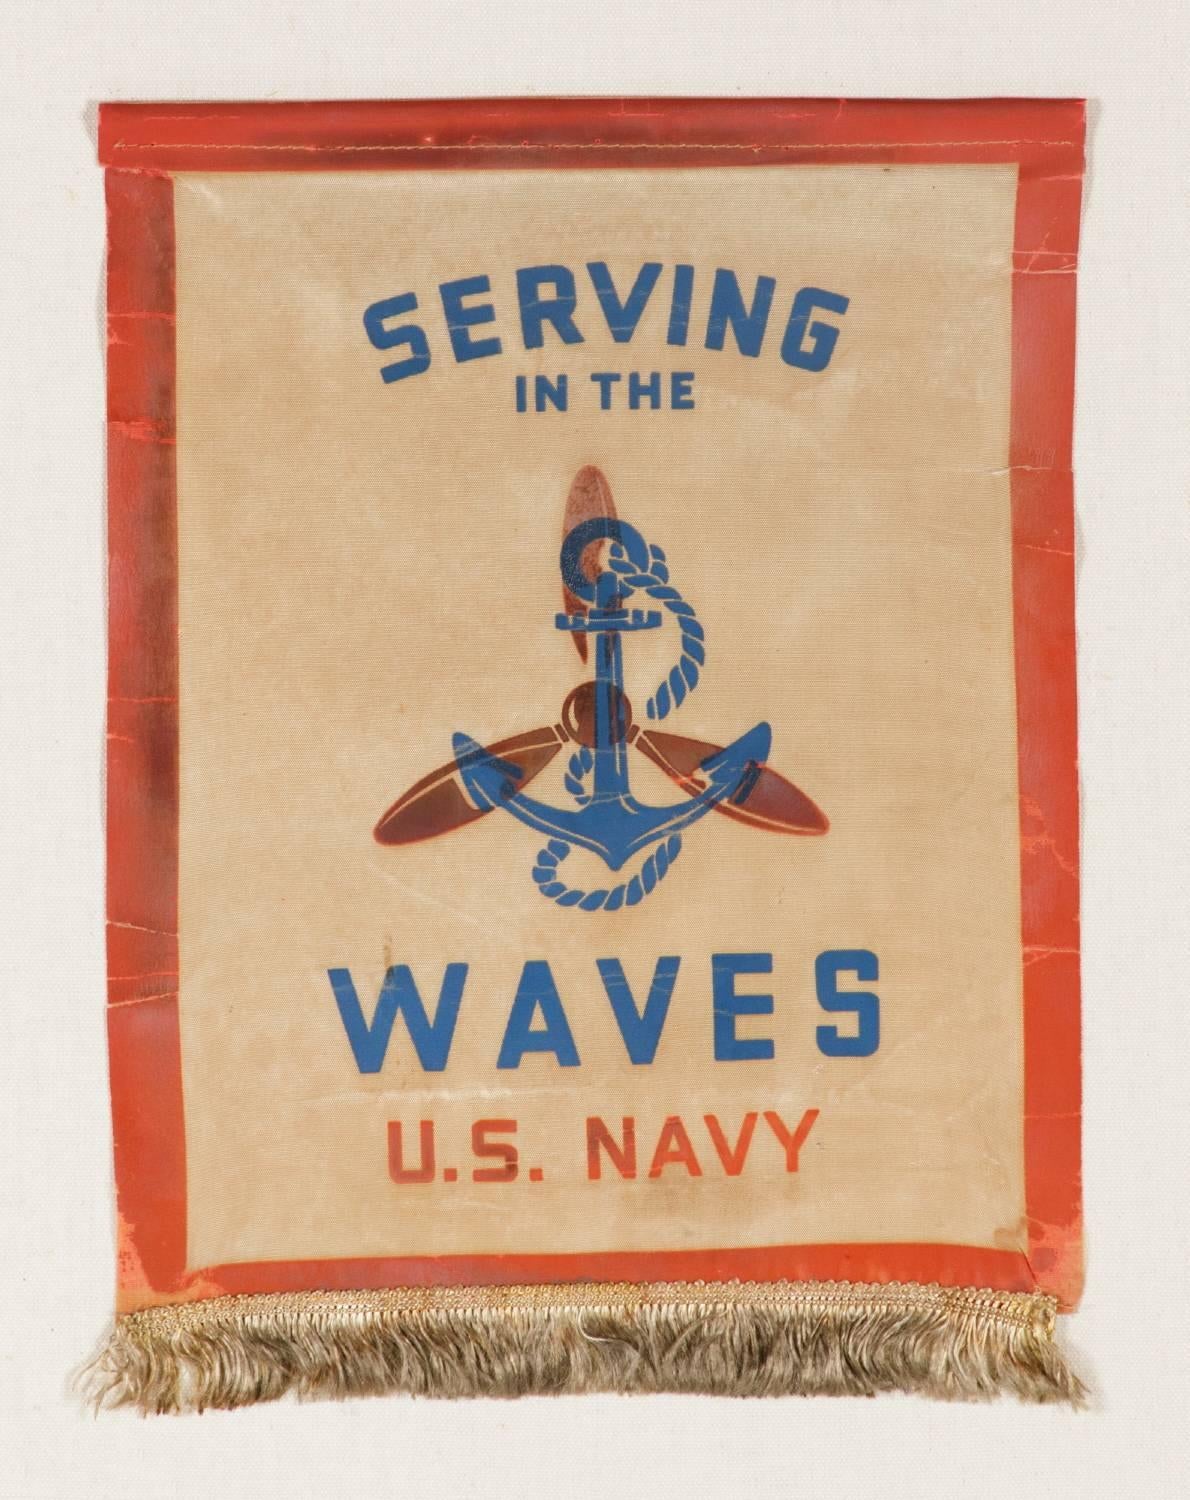 Serving In The Waves: An Extremely Rare WWII service banner for a woman in the U.S. Navy Reserves:

The practice of displaying a service banner became popular during WWI (U.S. involvement 1917-1918) and was continued or even increased during WWII